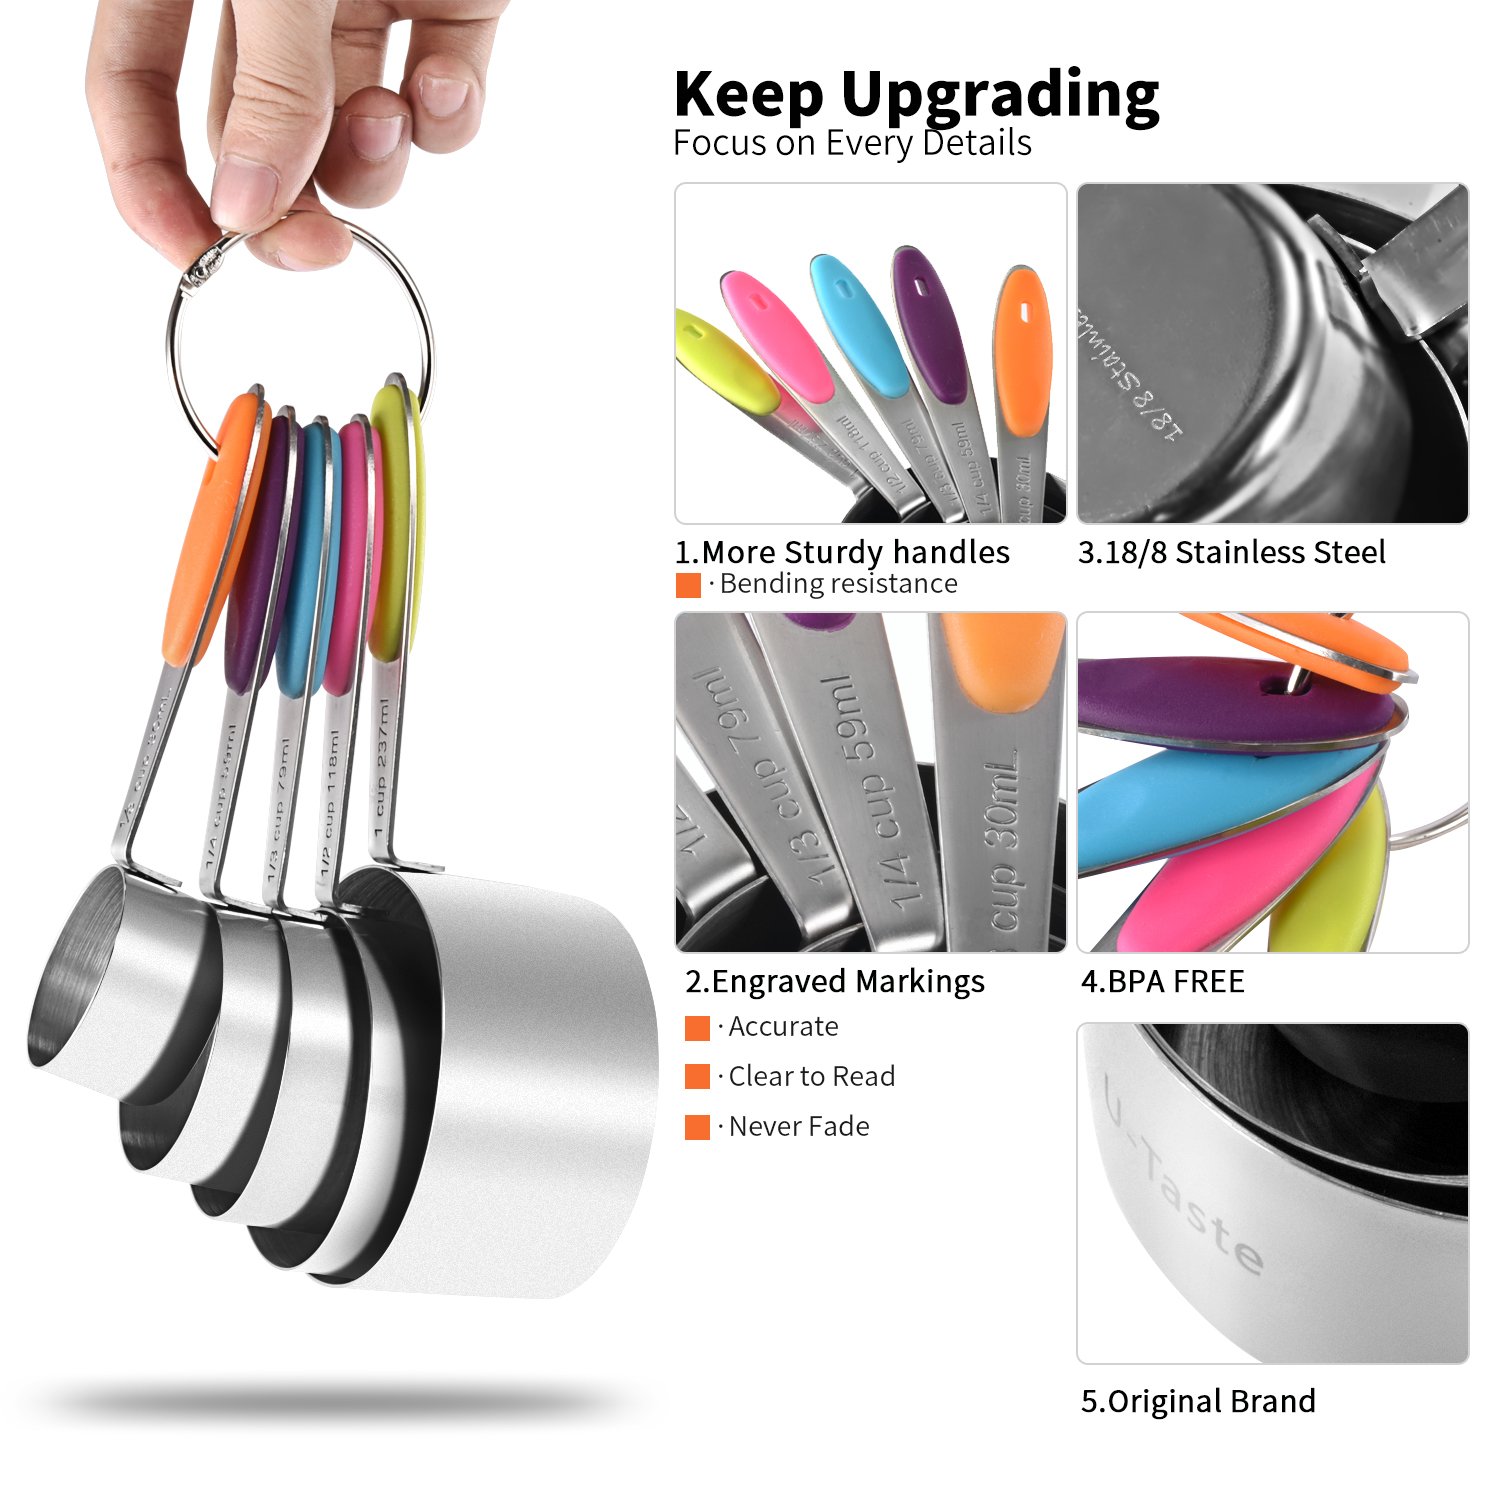 12 Piece Measuring Cups and Spoons Set in 18/8 Stainless Steel : 7 Measuring Cups & 5 Measuring Spoons